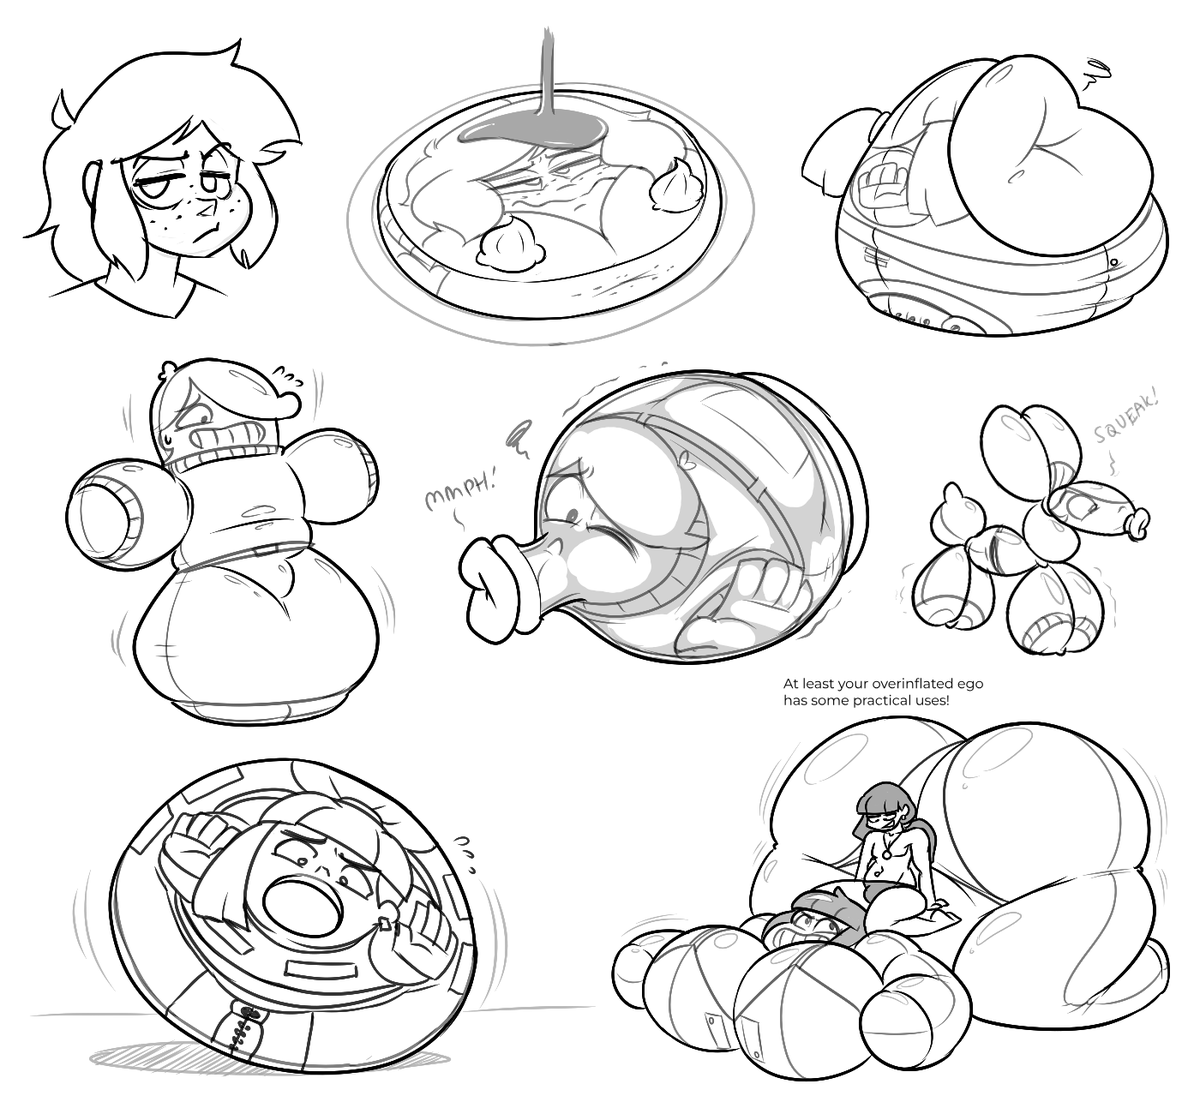 Some quick doodles I did with @Dunnhier1, featuring various TFs with Melany, Deck-Tan, and his OC Constantine. Even Switch-Tan got in on the action, to her dismay.